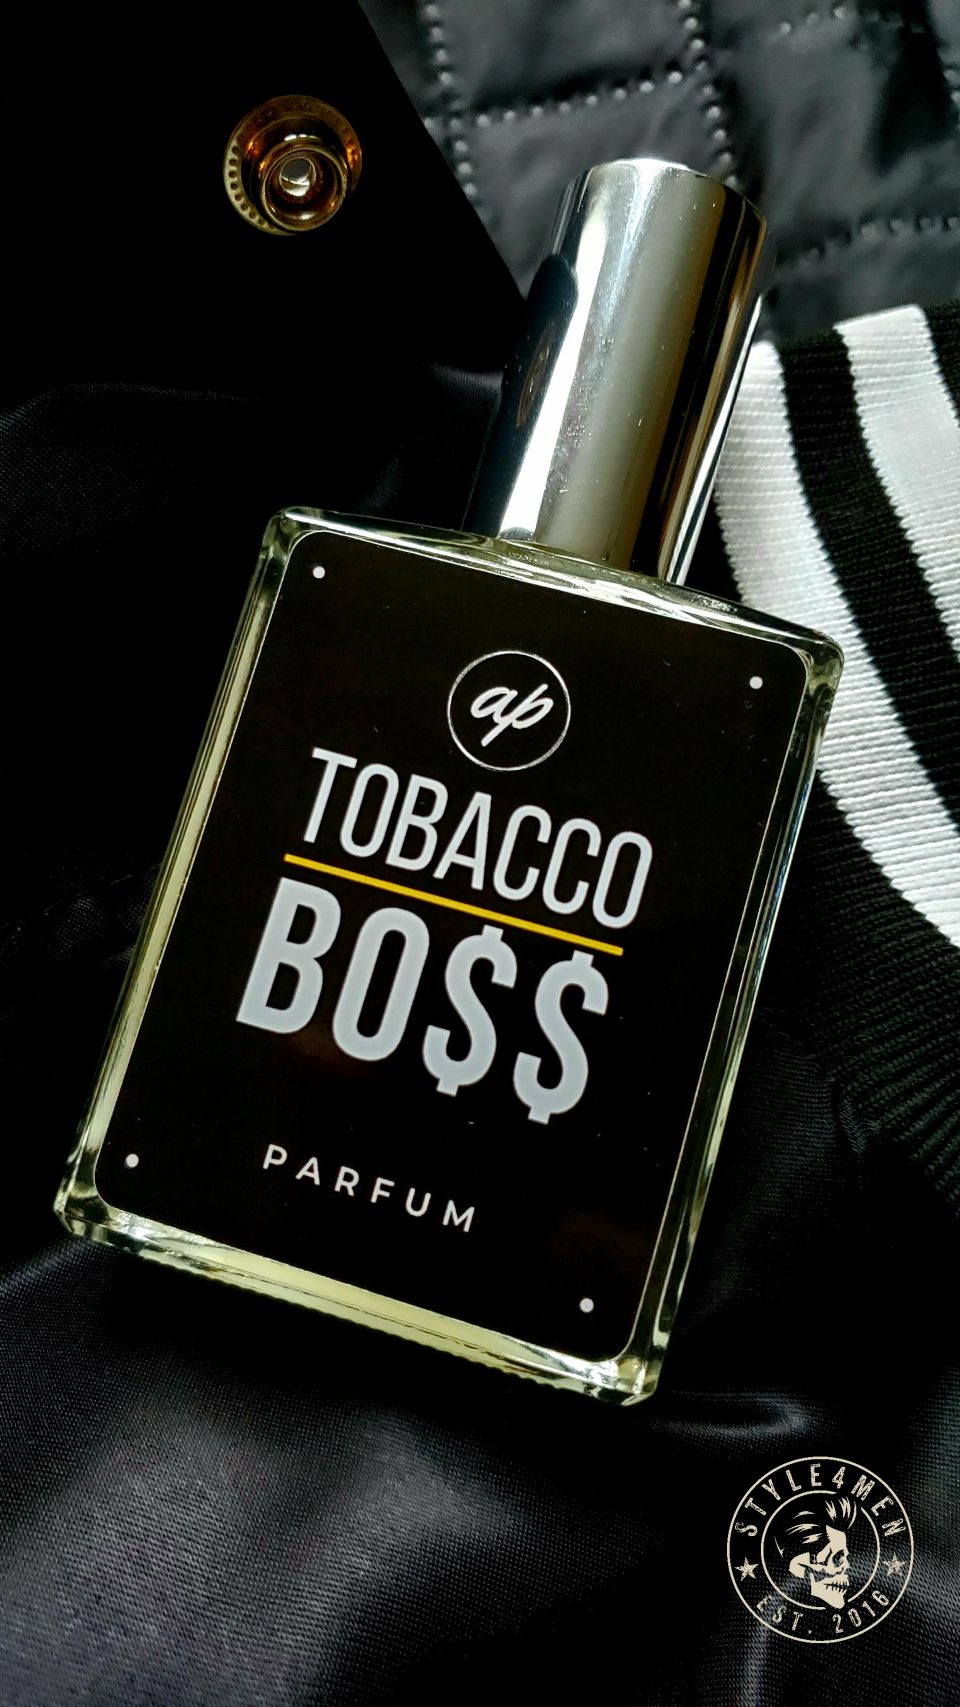 TOBACCO BOSS reinvents tobacco into something new